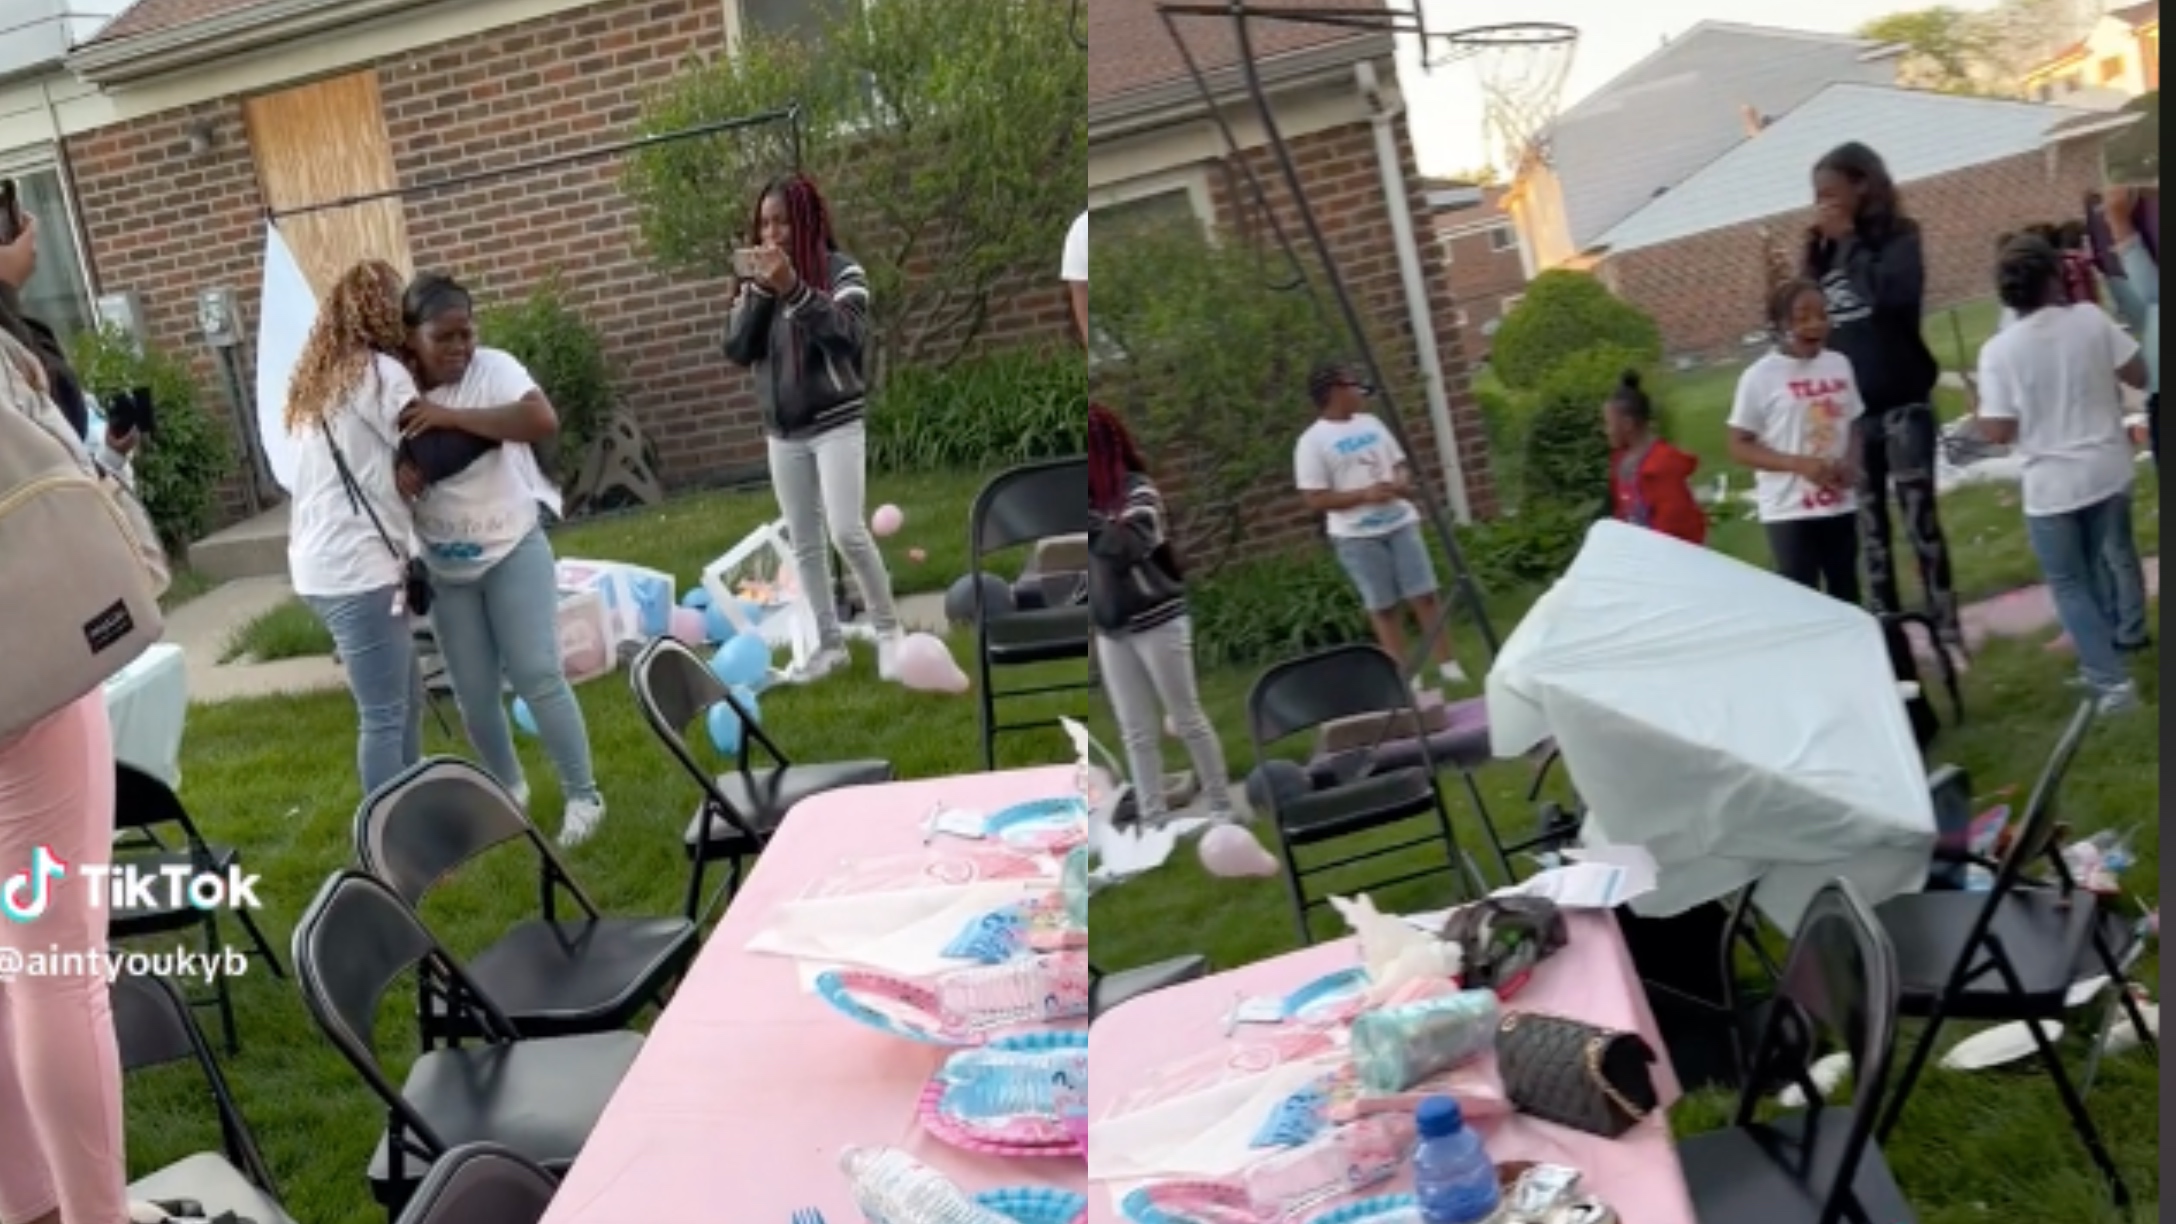 The Woman Behind the First Viral Gender Reveal Is Having Second Thoughts